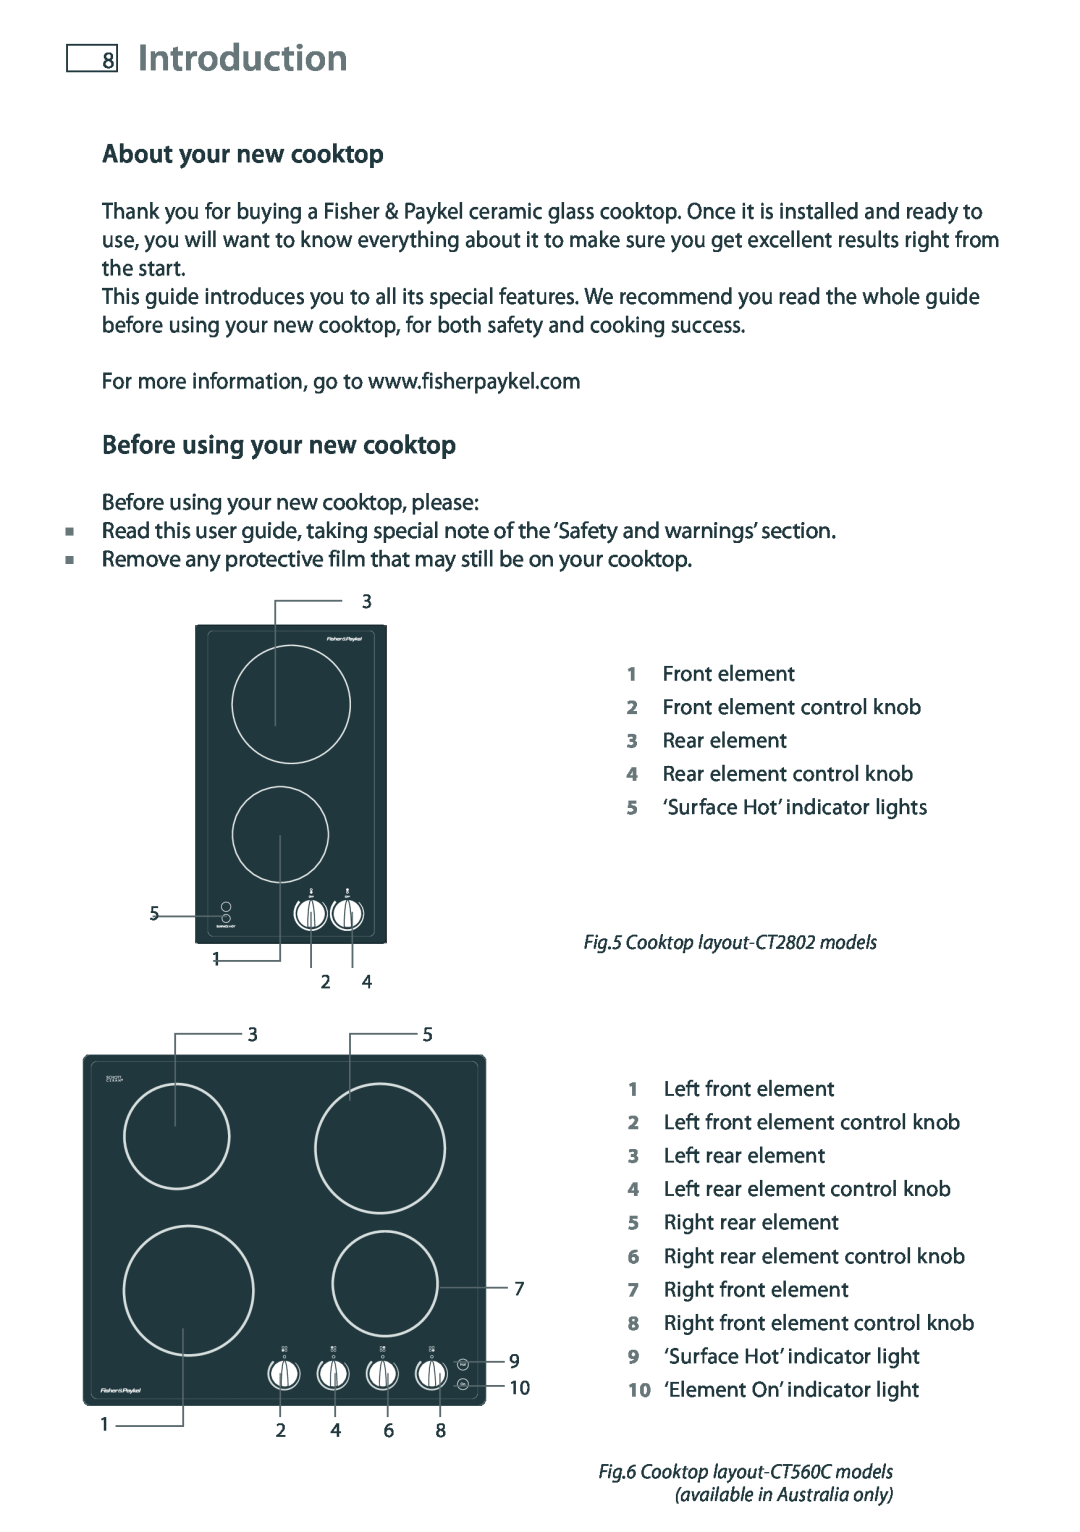 Fisher & Paykel CT560C, CT2802, CT6551S, CT5602F Introduction, About your new cooktop, Before using your new cooktop 